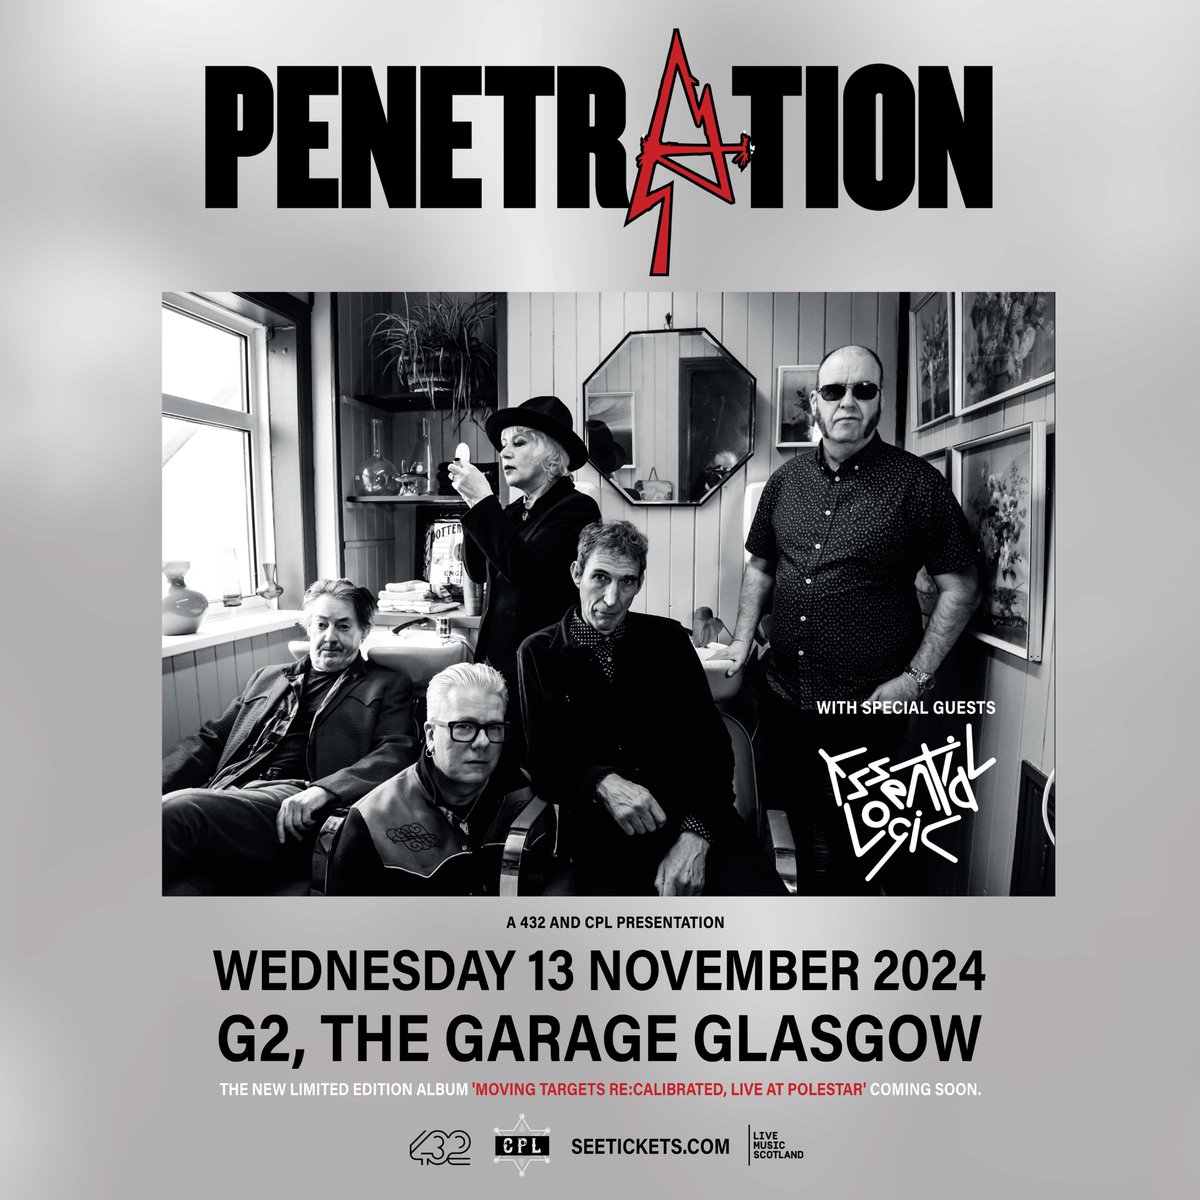 North East punk legends Penetration return to Scotland with Essential Logic (ft. Lora Logic of X-Ray Spex) for a big night at @Garageglasgow (G2) on 13 November! 🙌 Tickets on sale NOW 🎟 ➡ bit.ly/3TlxZUl